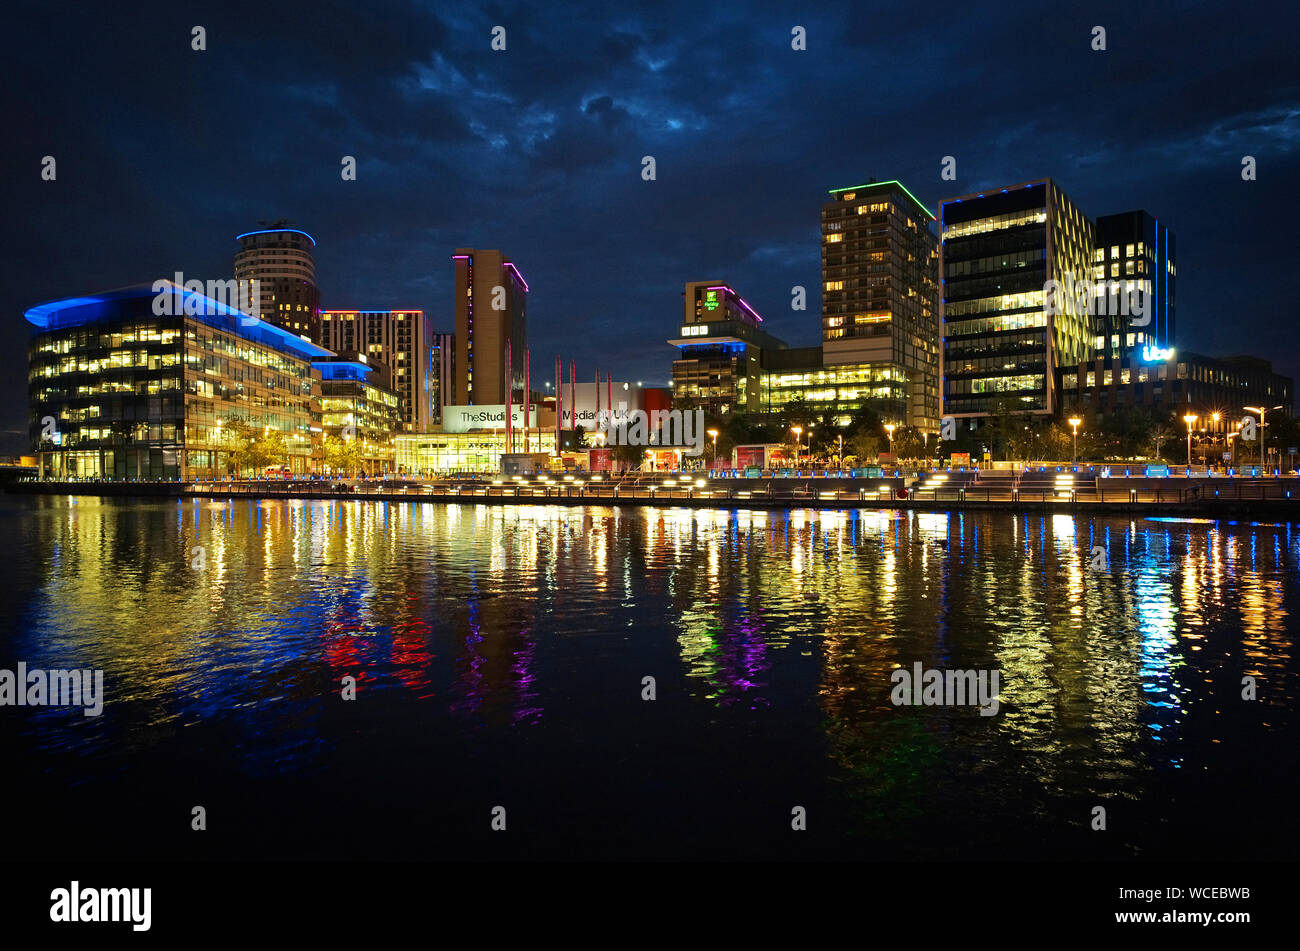 The images shows Media City in Salford, built on the site of the old Manchester Docks at Salford Quays, on the Manchester Ship Canal. Stock Photo